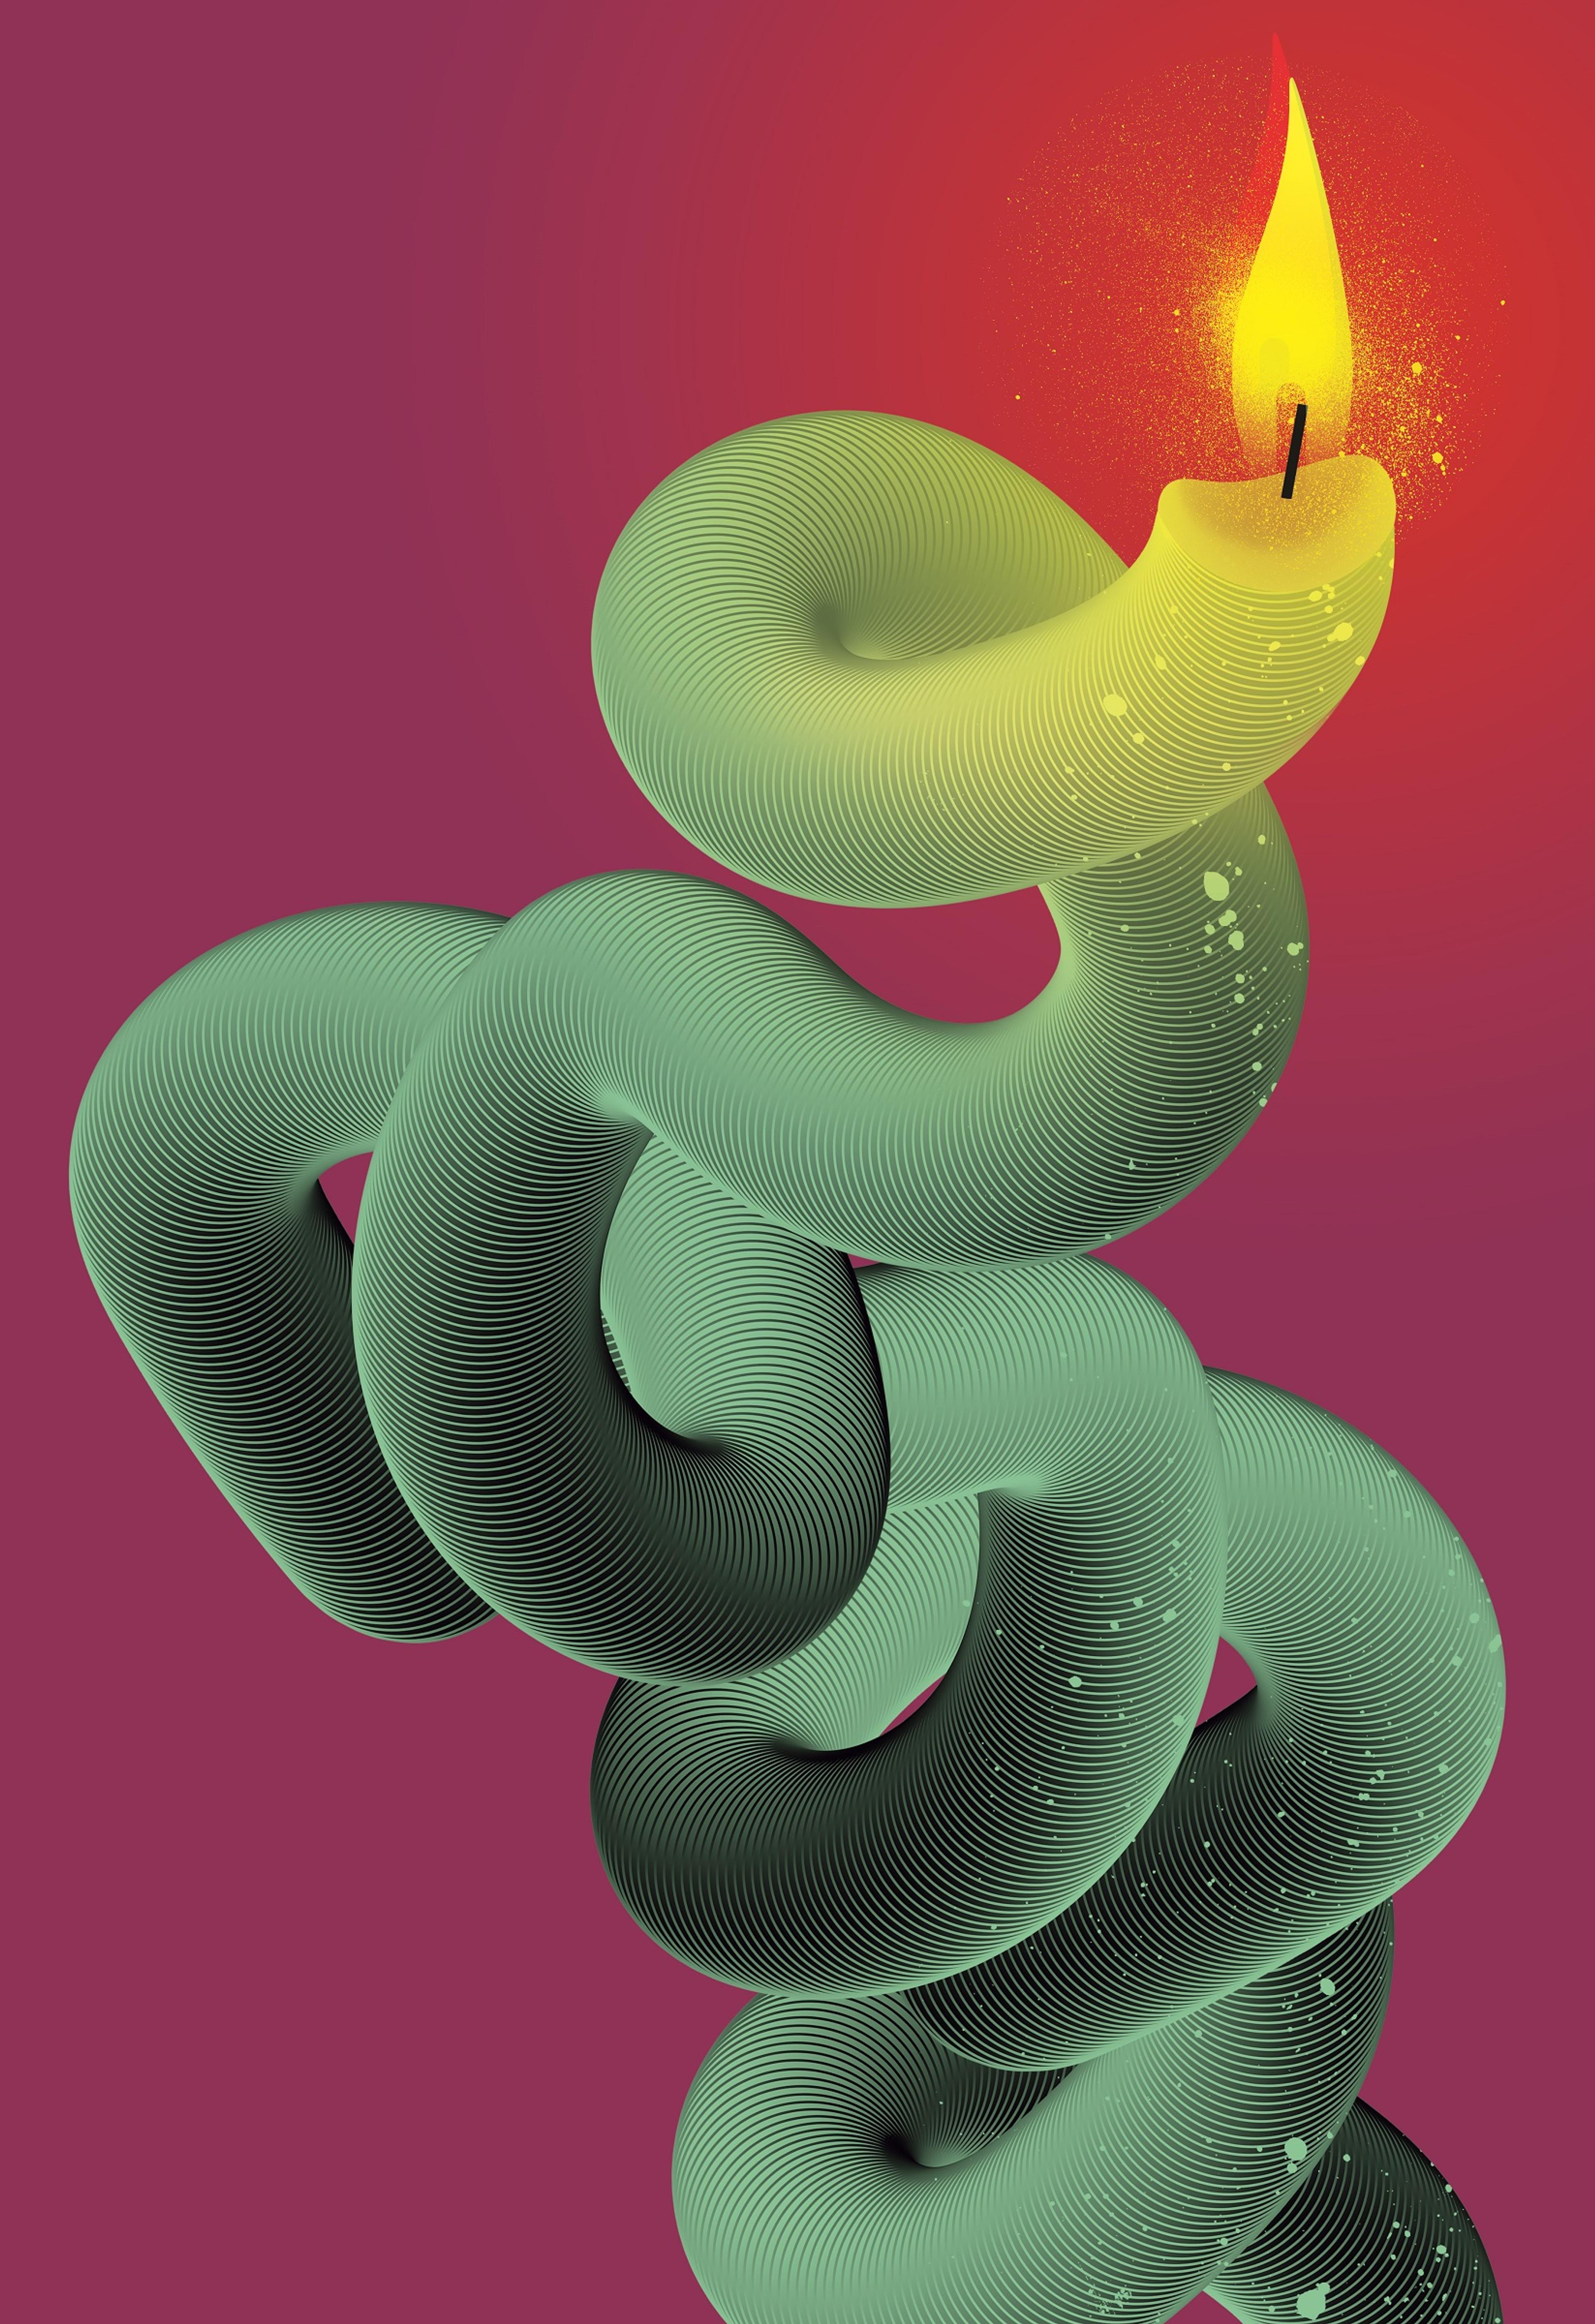 Illustration of a twisting green candle